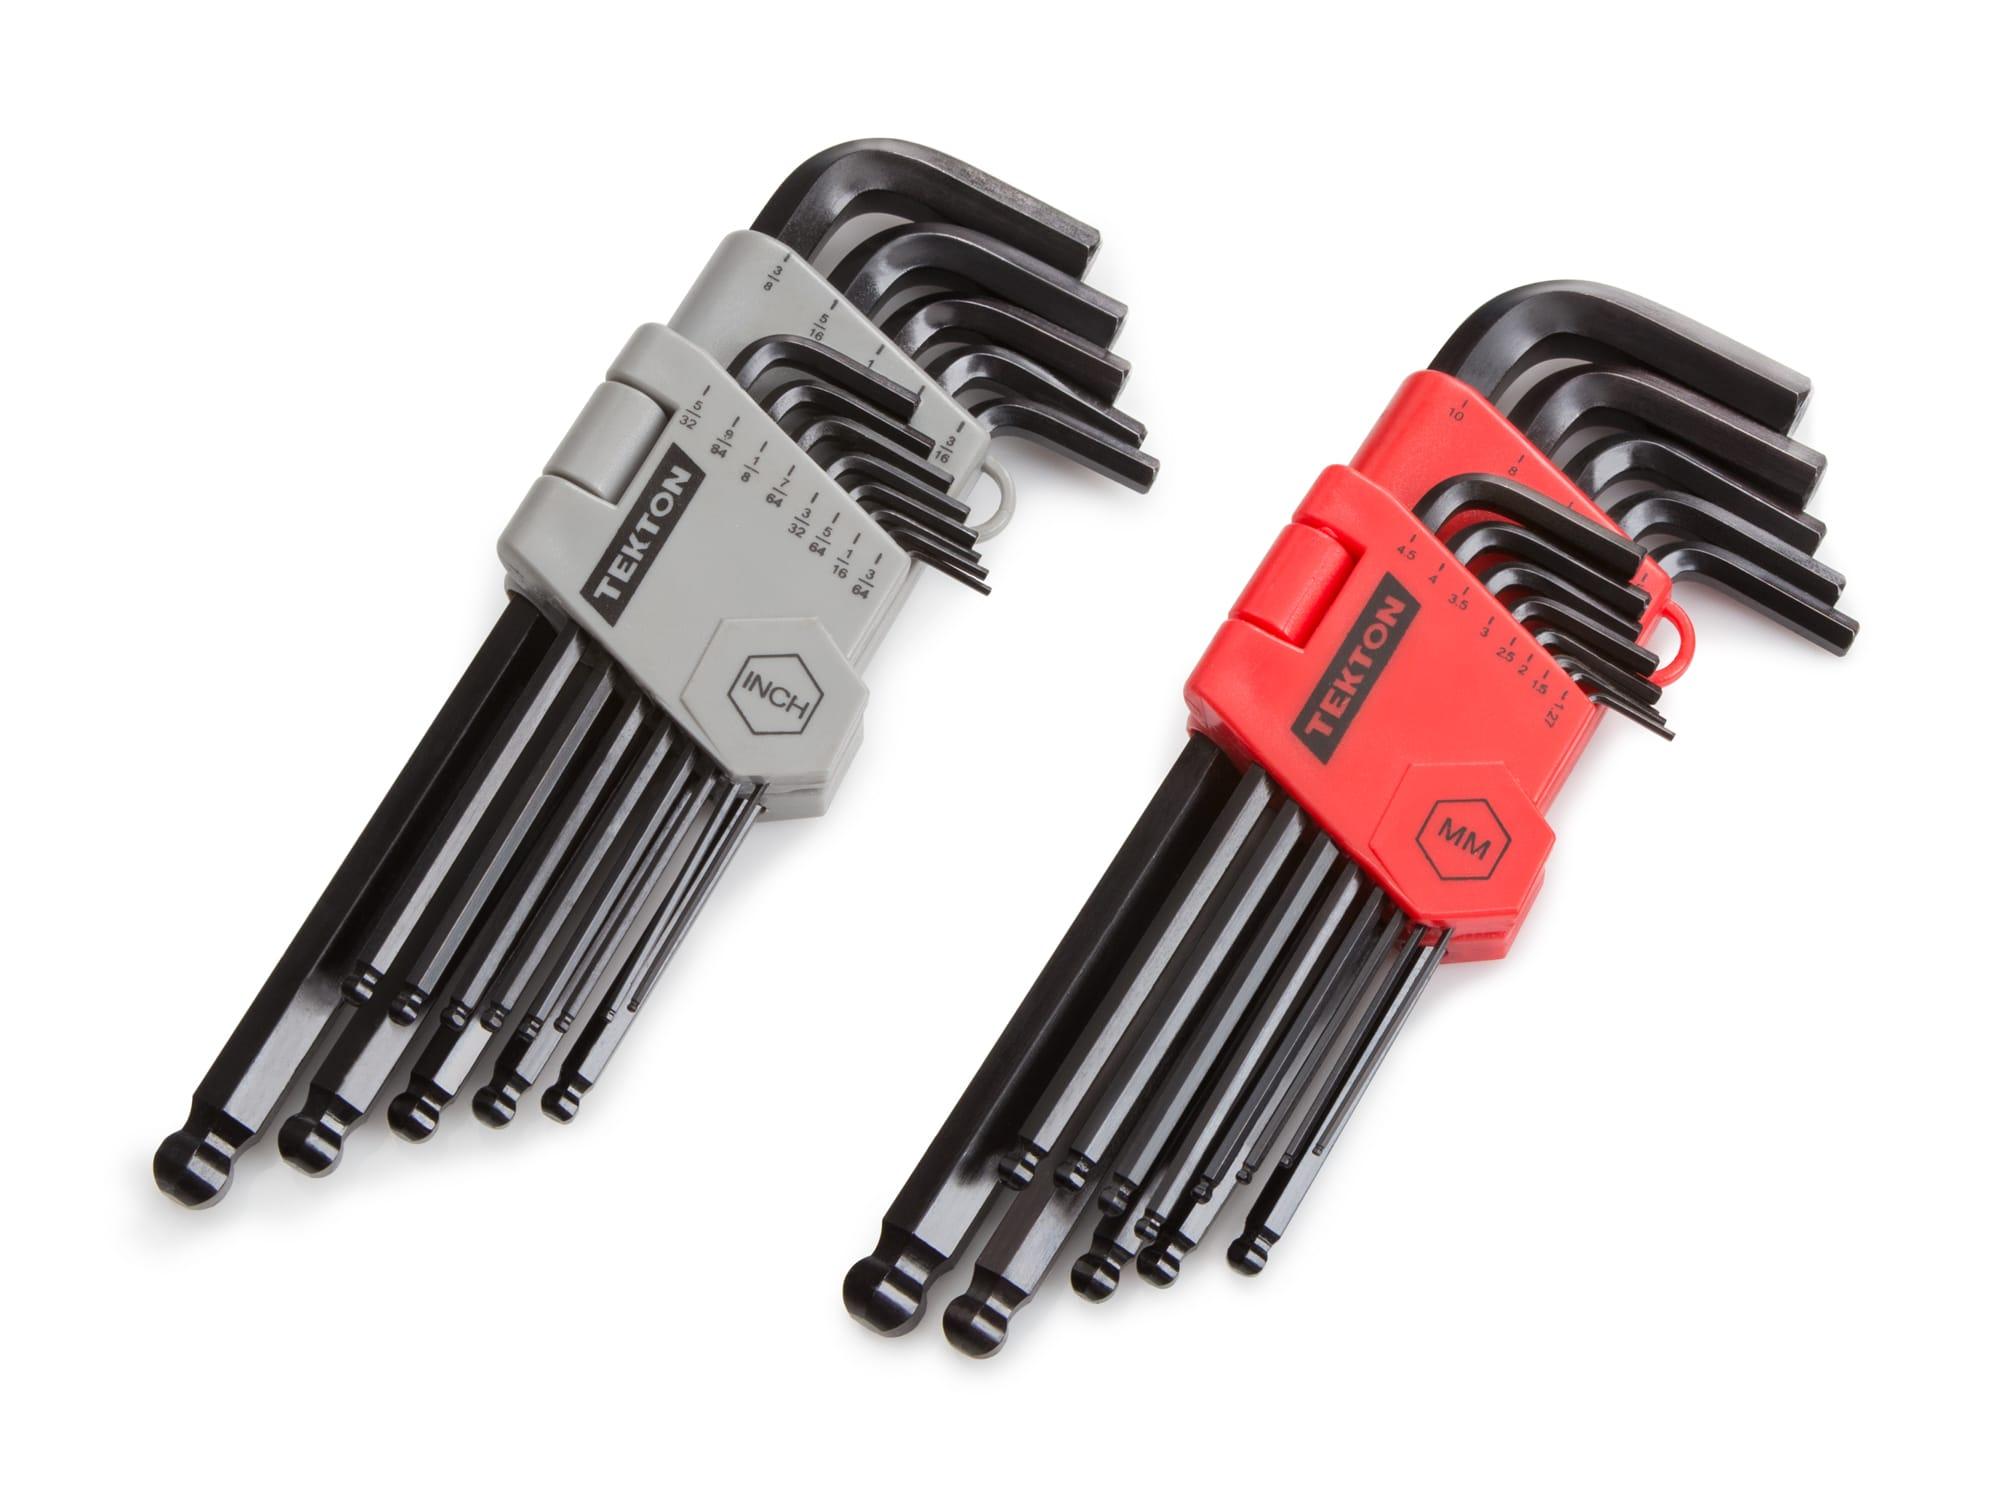 Ball End Hex Key Wrench Set, 26-Piece (3/64-3/8 in., 1.27-10 mm)